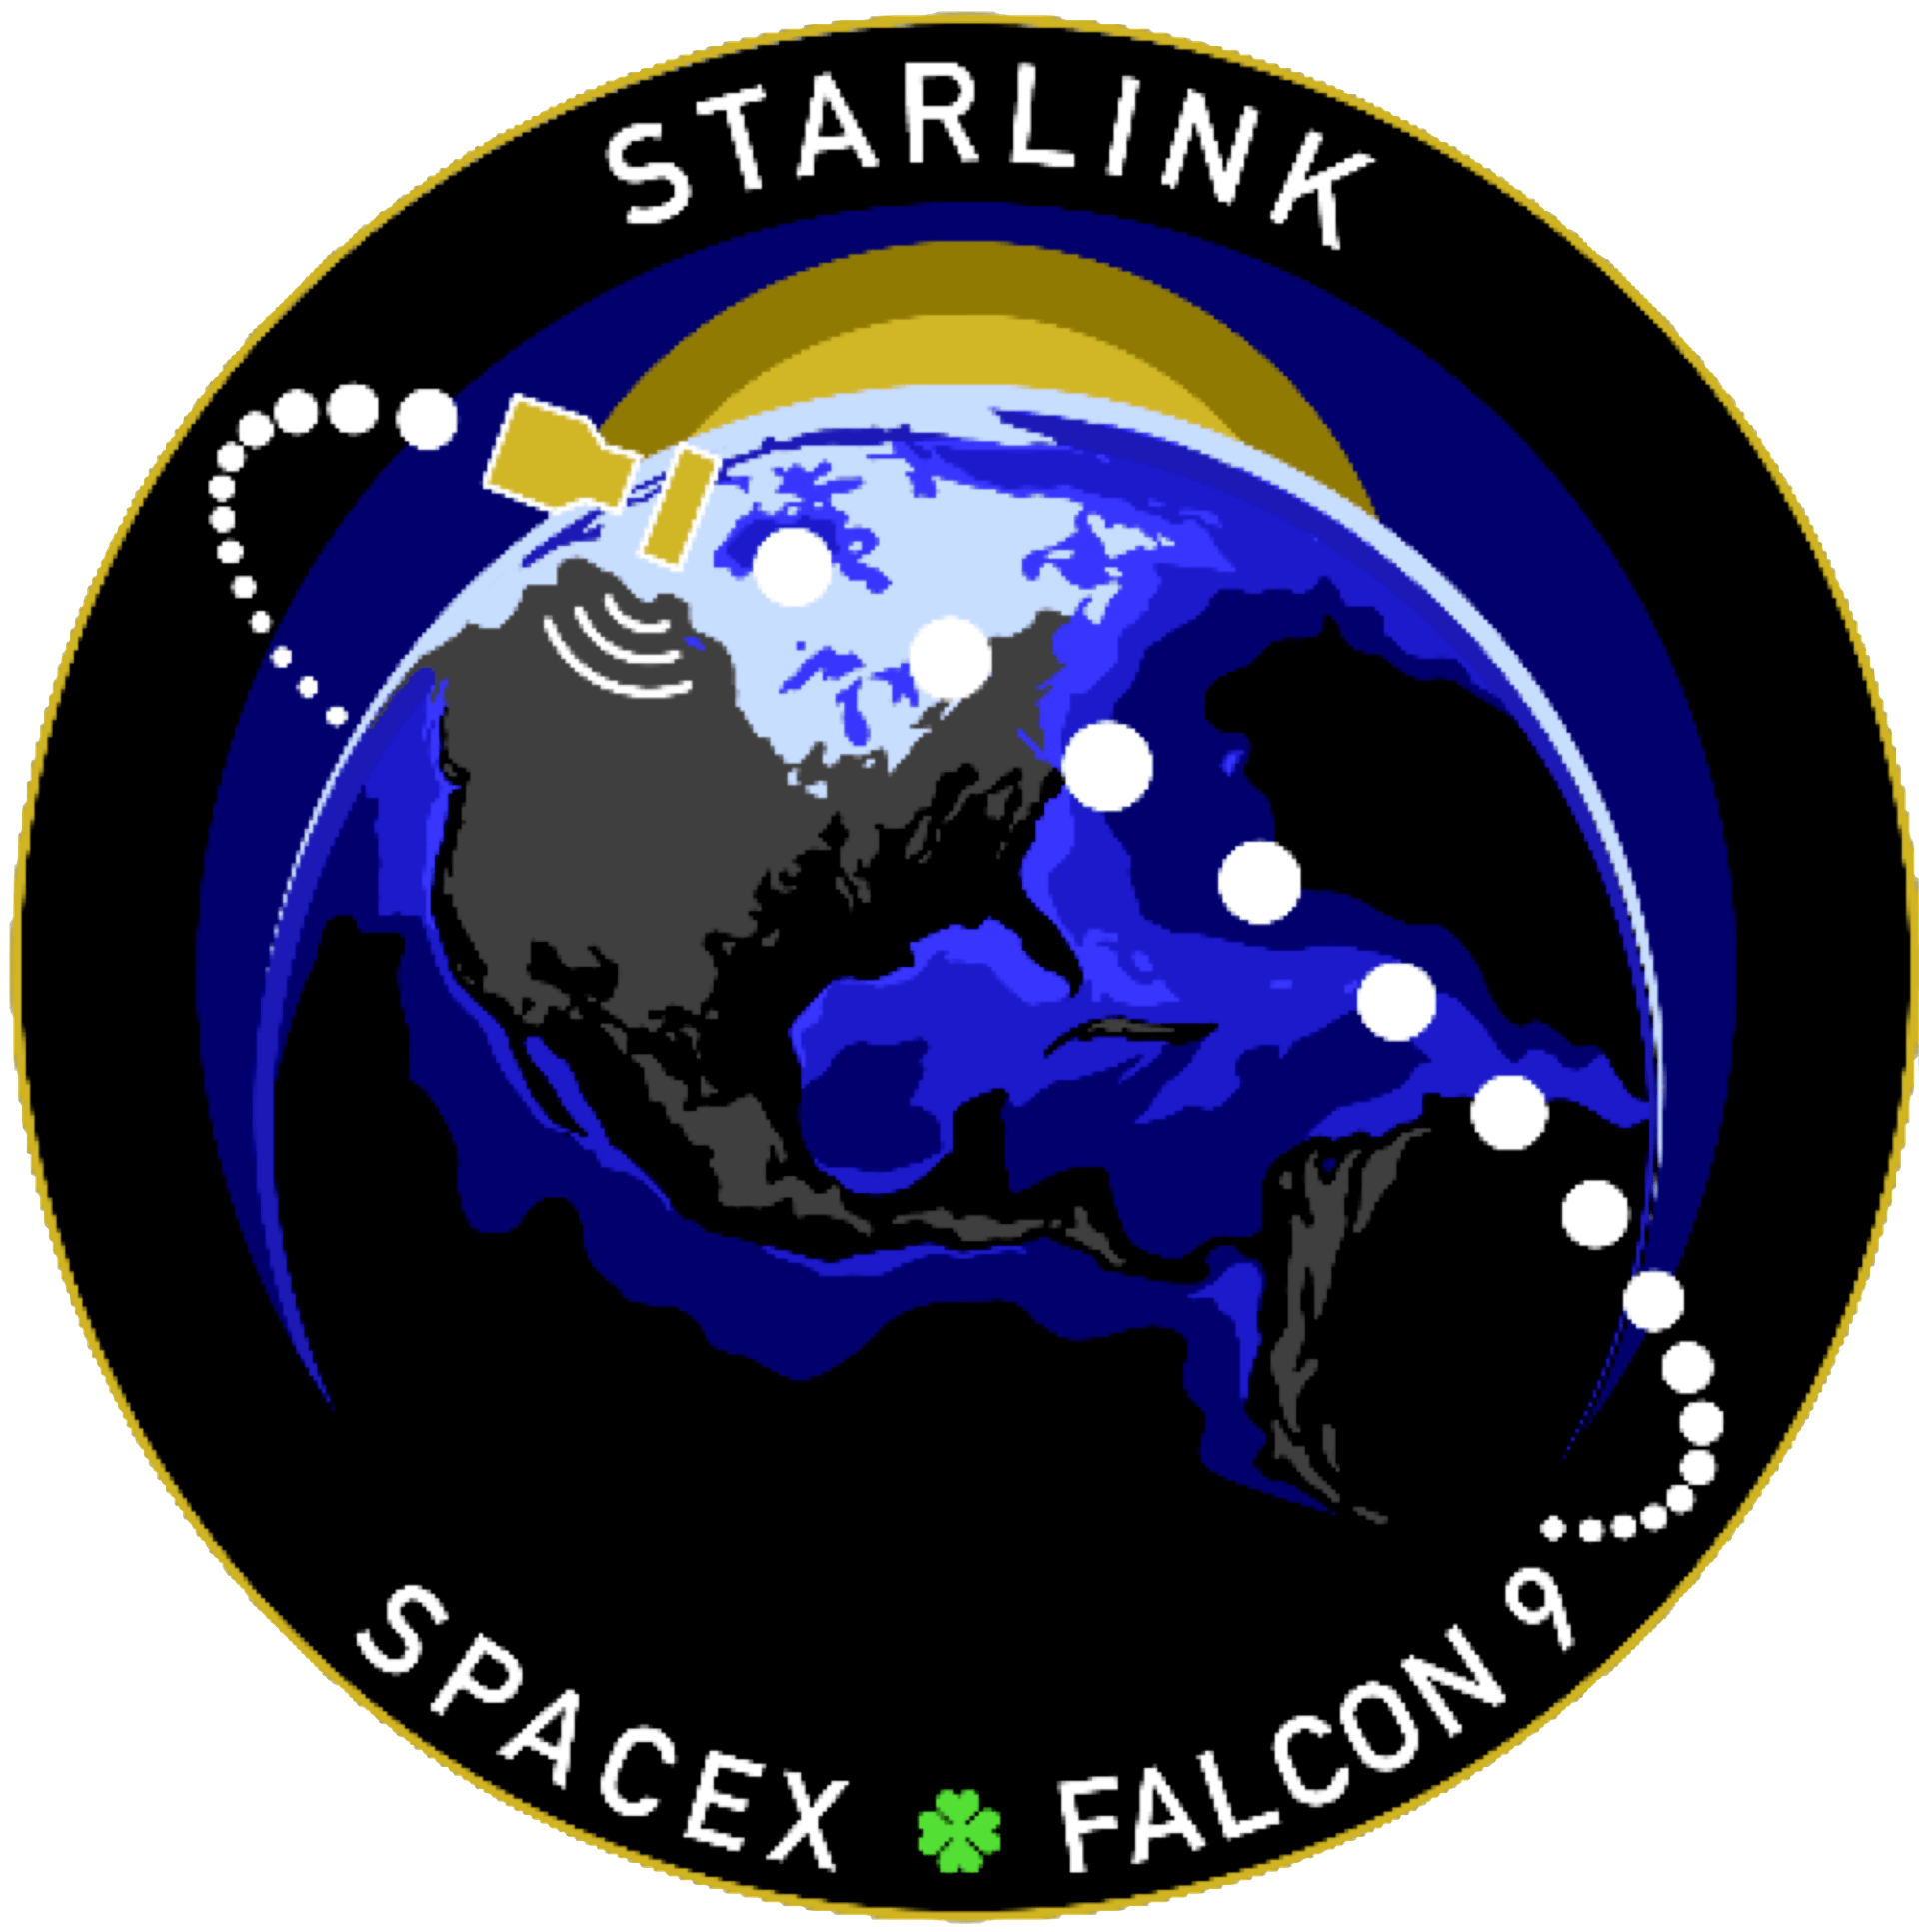 Mission patch for Starlink 20